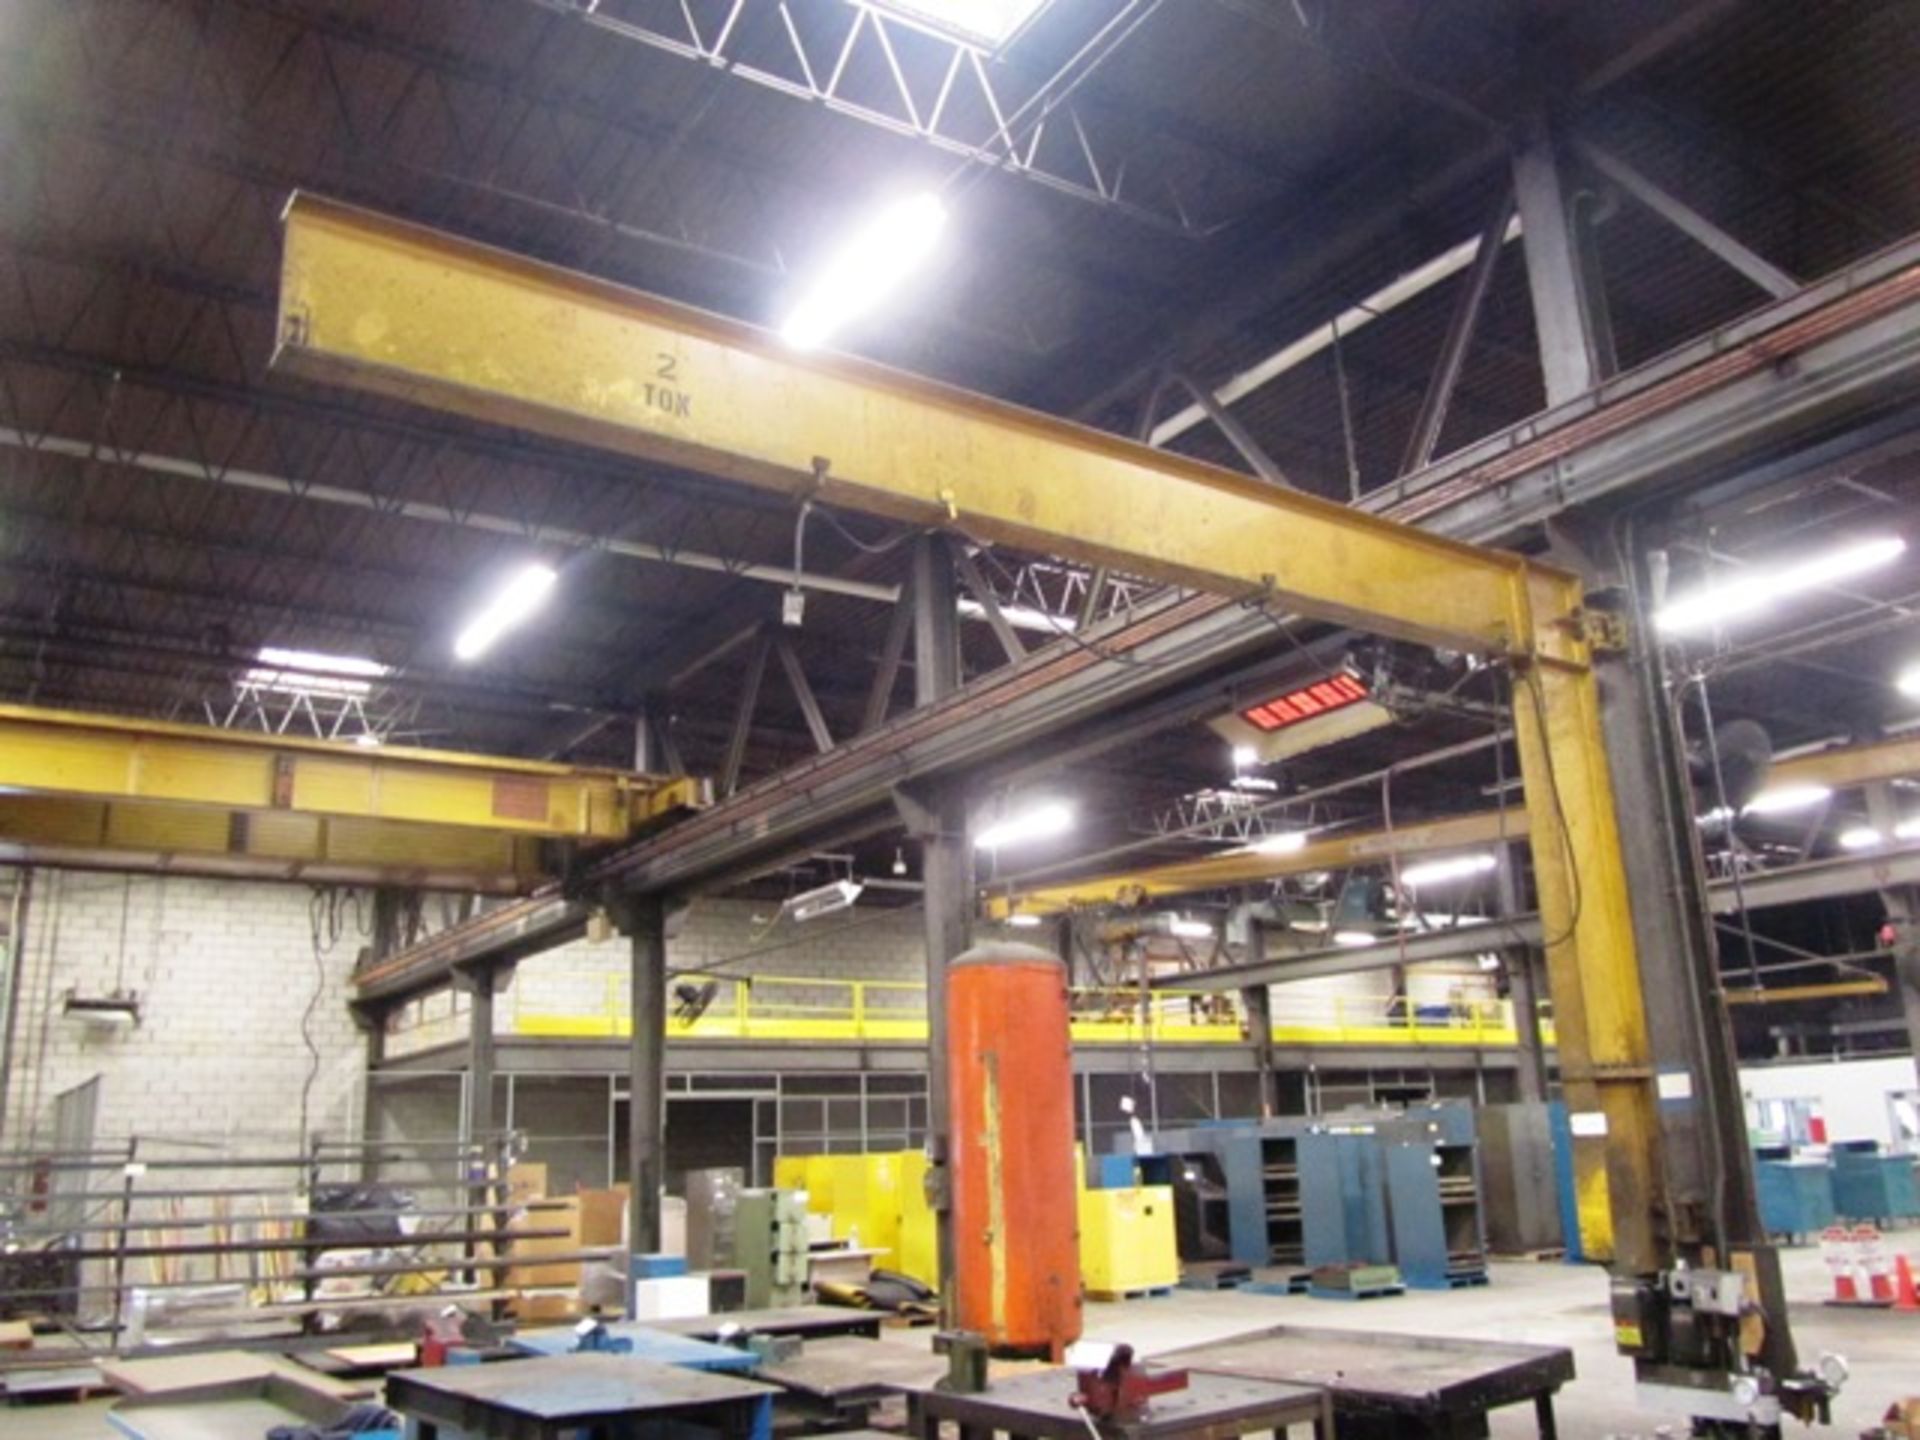 2 Ton Wal Mounted Jib Crane with Budgit 2 Ton Electric Hoist with Pendant Control (hoist on pallet)